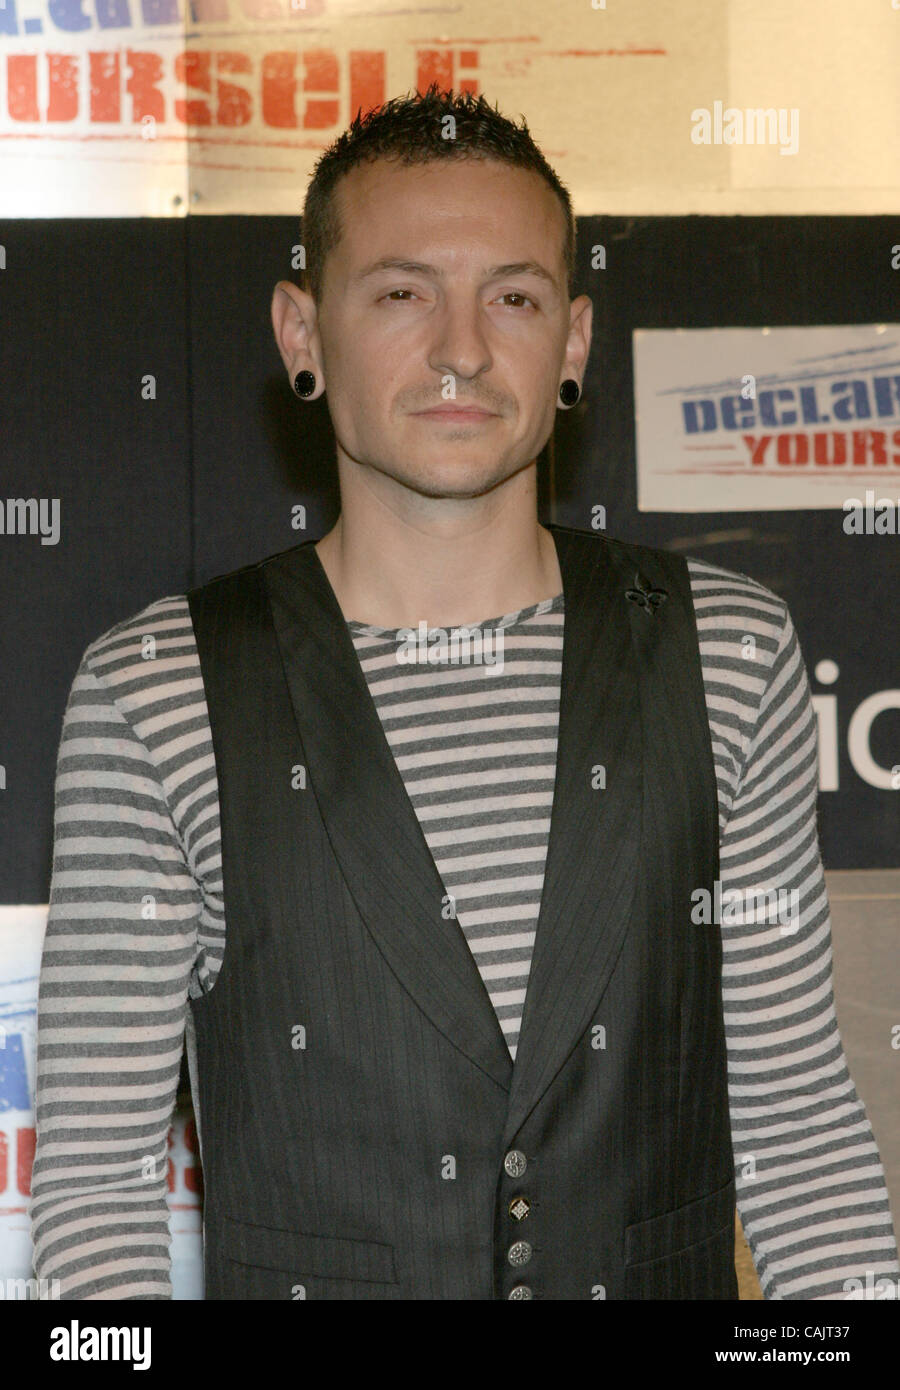 Sep 27, 2007 - Beverly Hills, CA, USA - CHESTER BENNINGTON of Linkin Park at the Hollywood Celebrates 18 Declare Yourself event. The Declare Yourself campaign focuses on getting young Americans to register to vote for the 2008 elections. (Credit Image: © Marianna Day Massey/ZUMA Press) Stock Photo